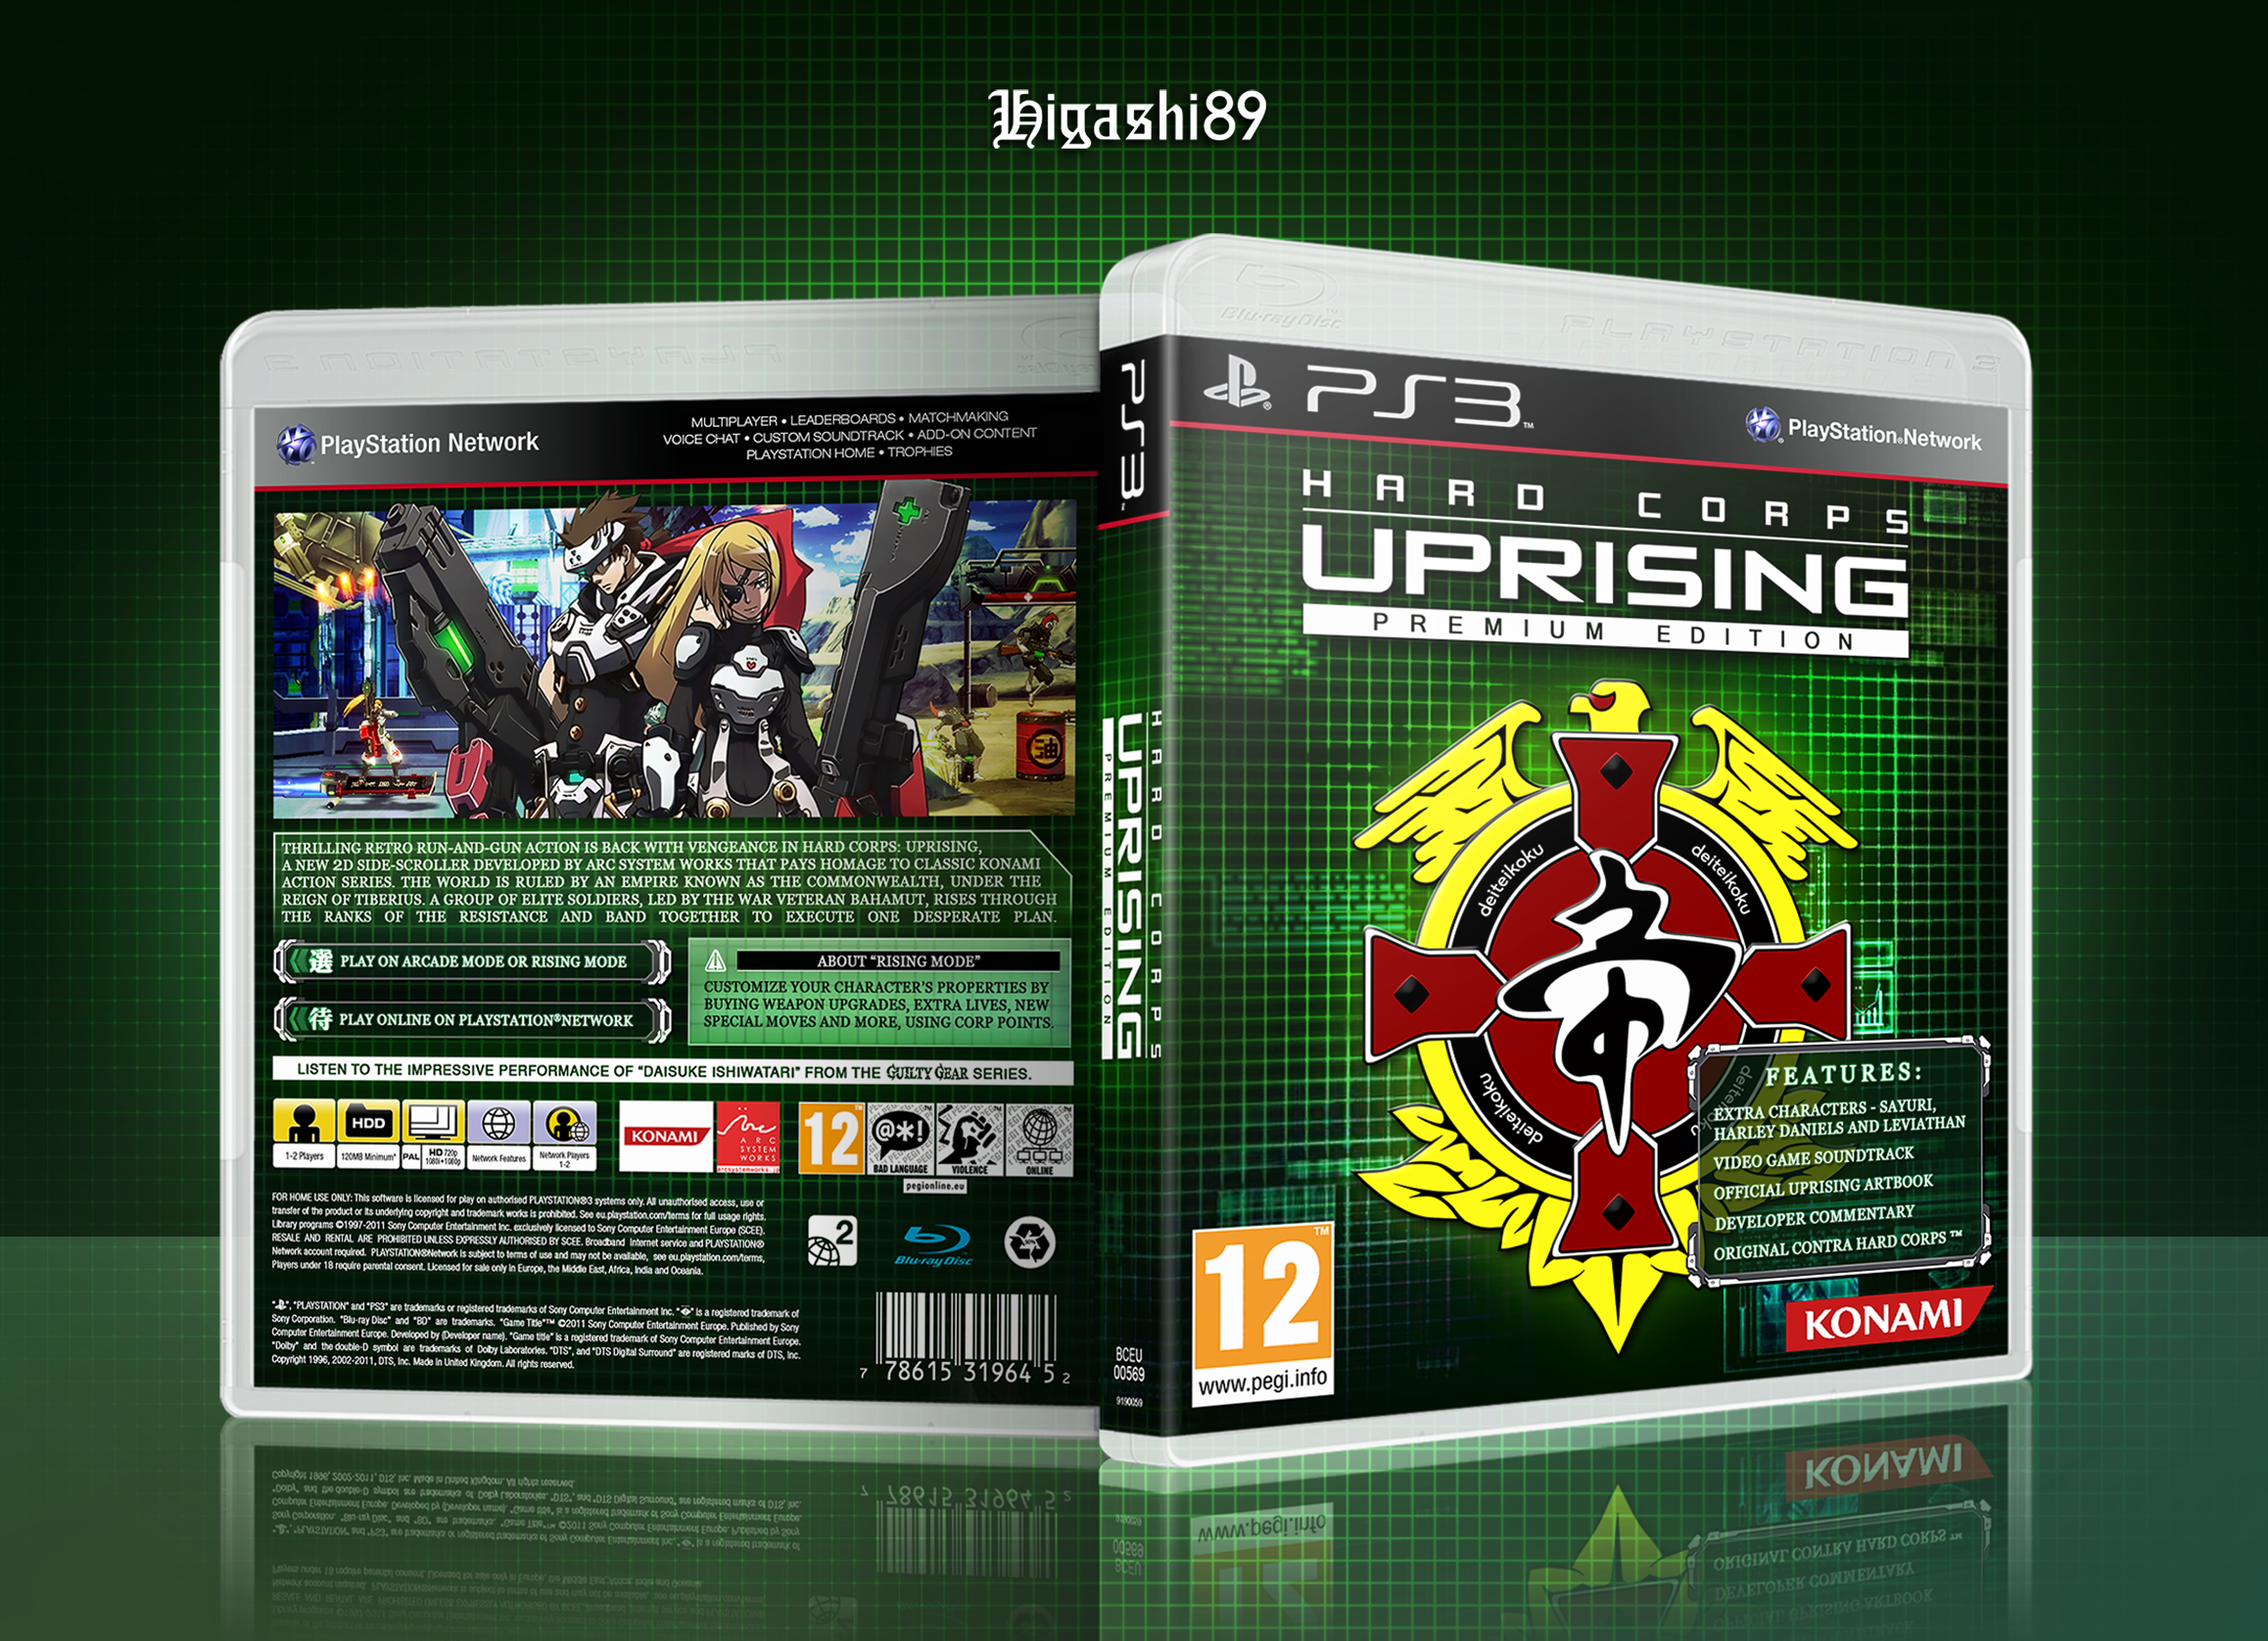 Hard Corps: Uprising box cover